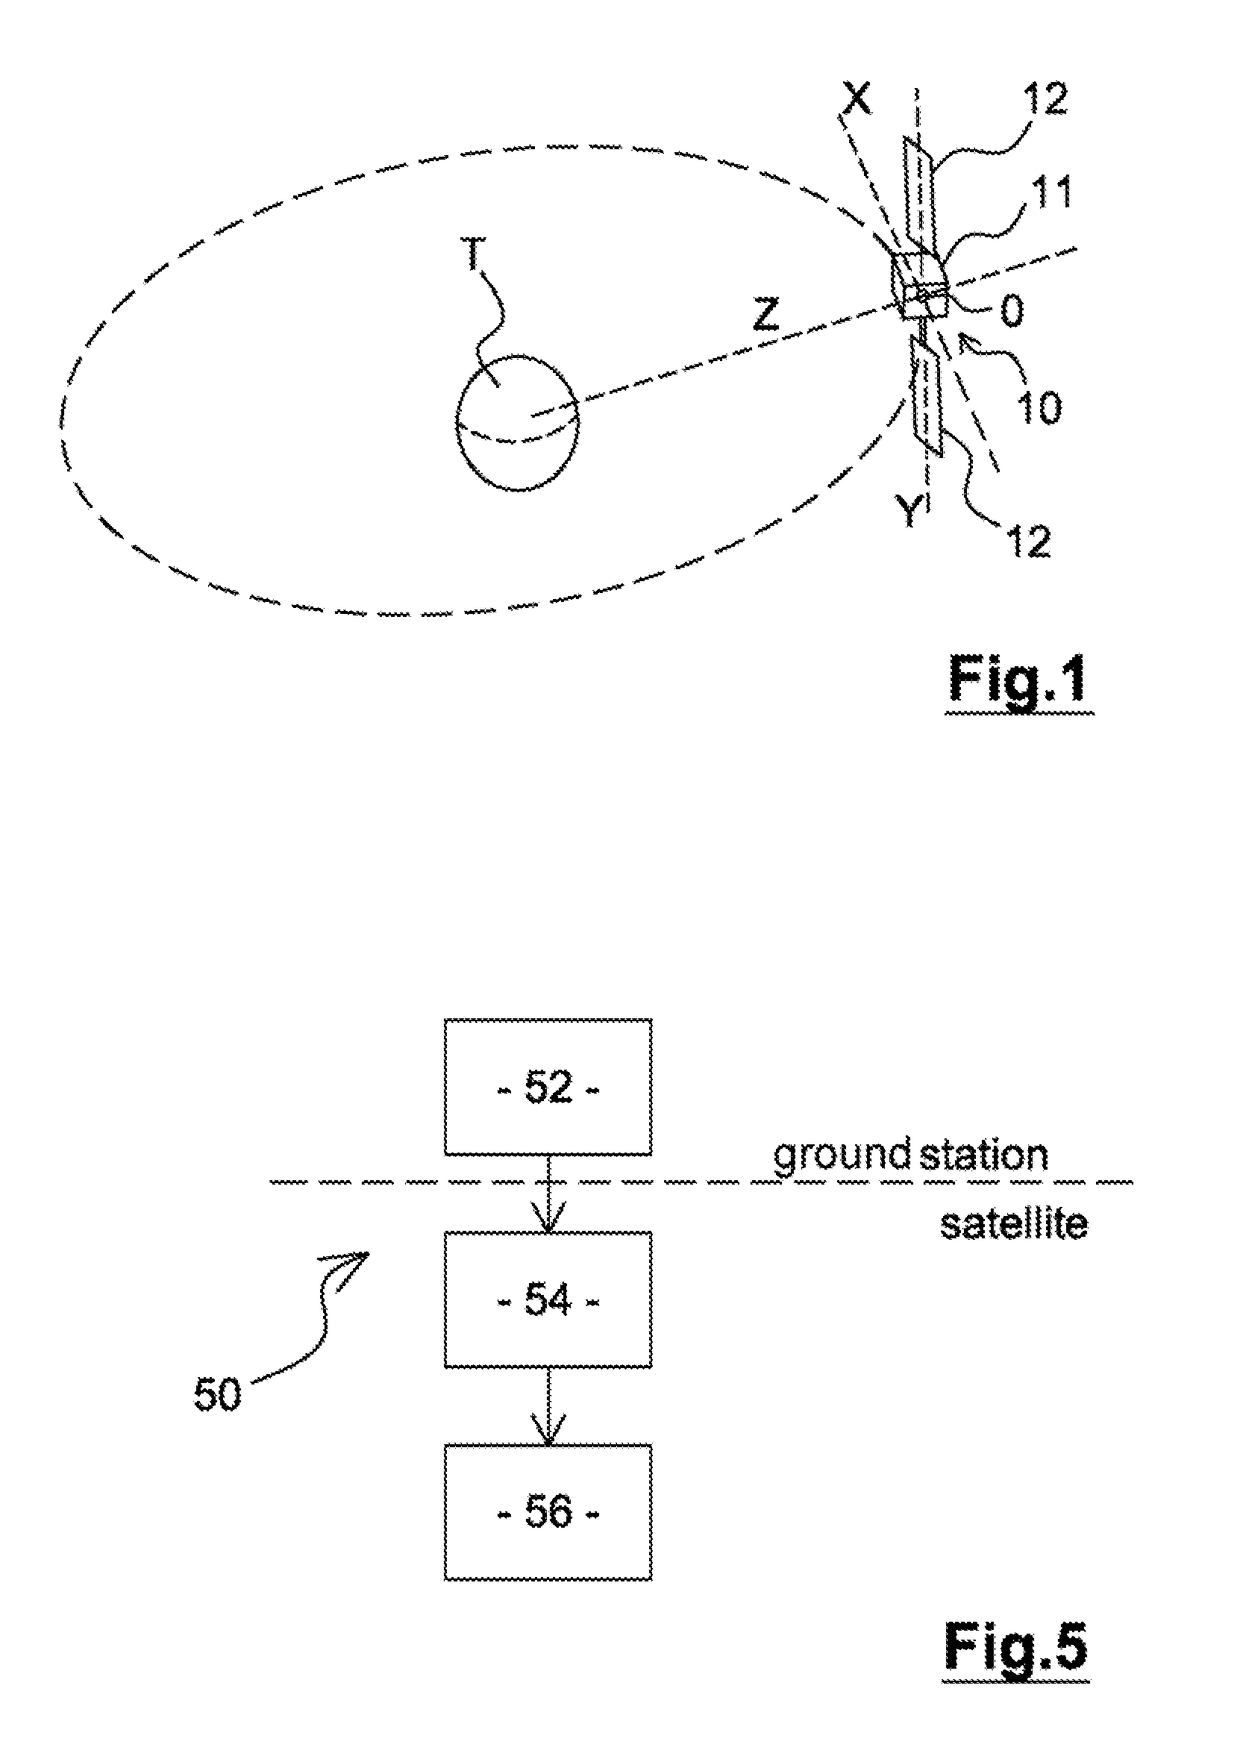 Method for controlling the orbit of a satellite in earth orbit, satellite and system for controlling the orbit of such a satellite